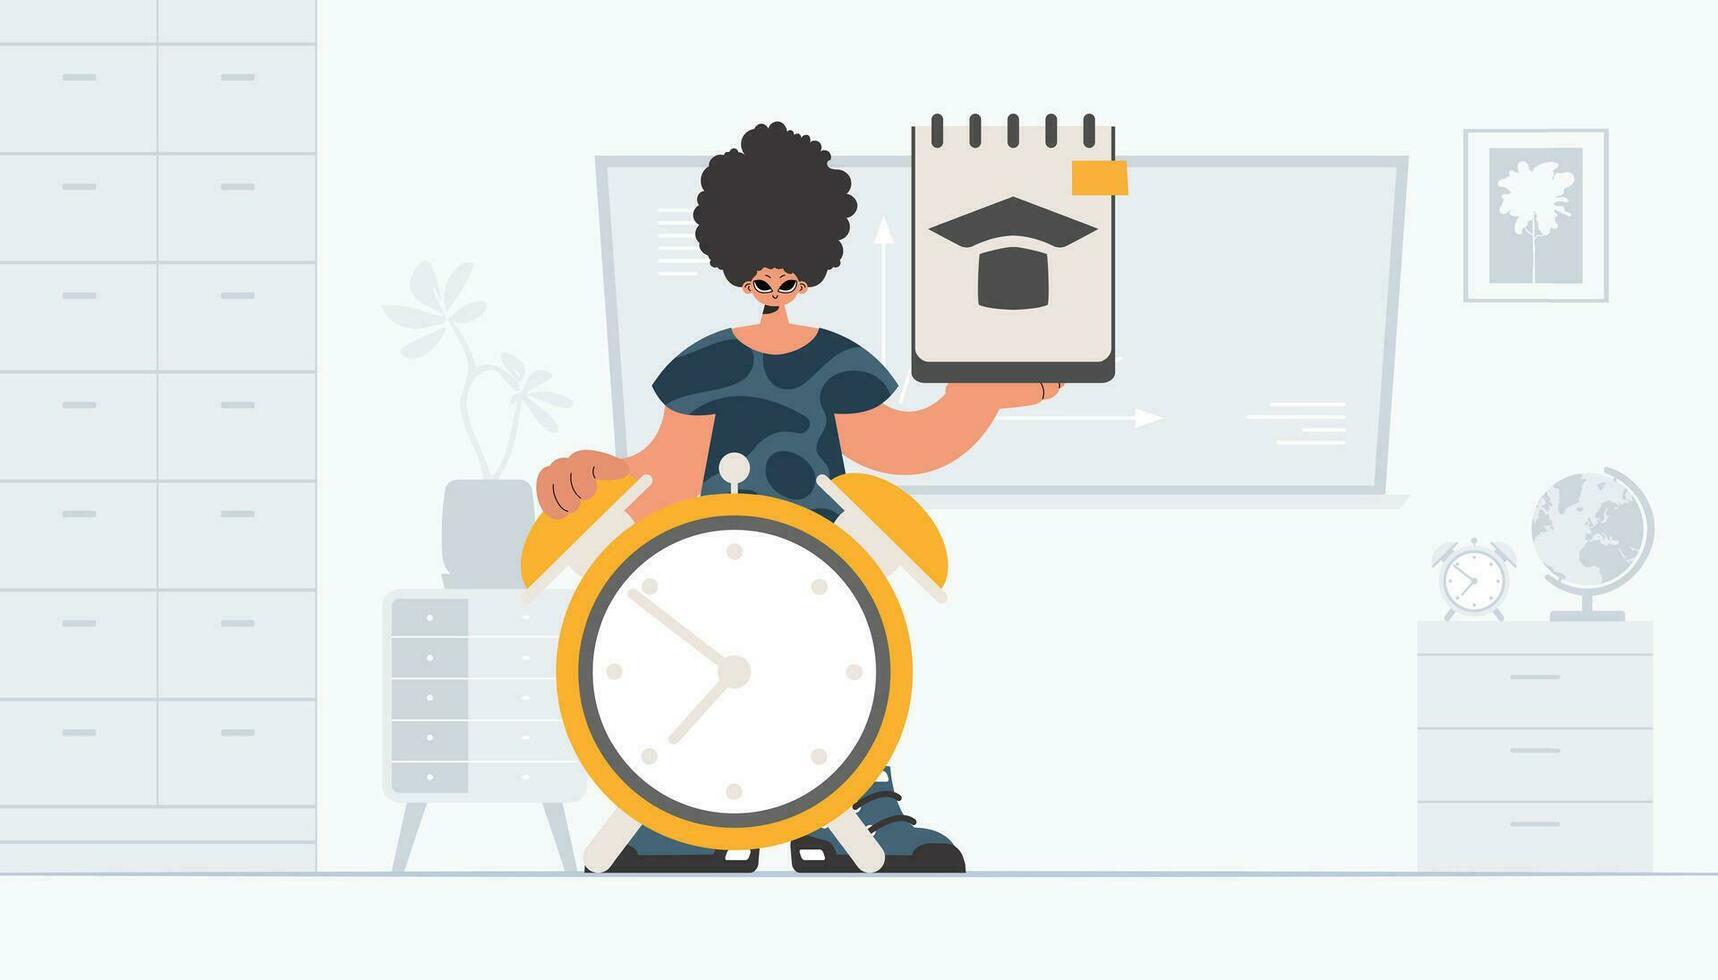 Person with curiously and caution clock, learning subject. Trendy style, Vector Illustration